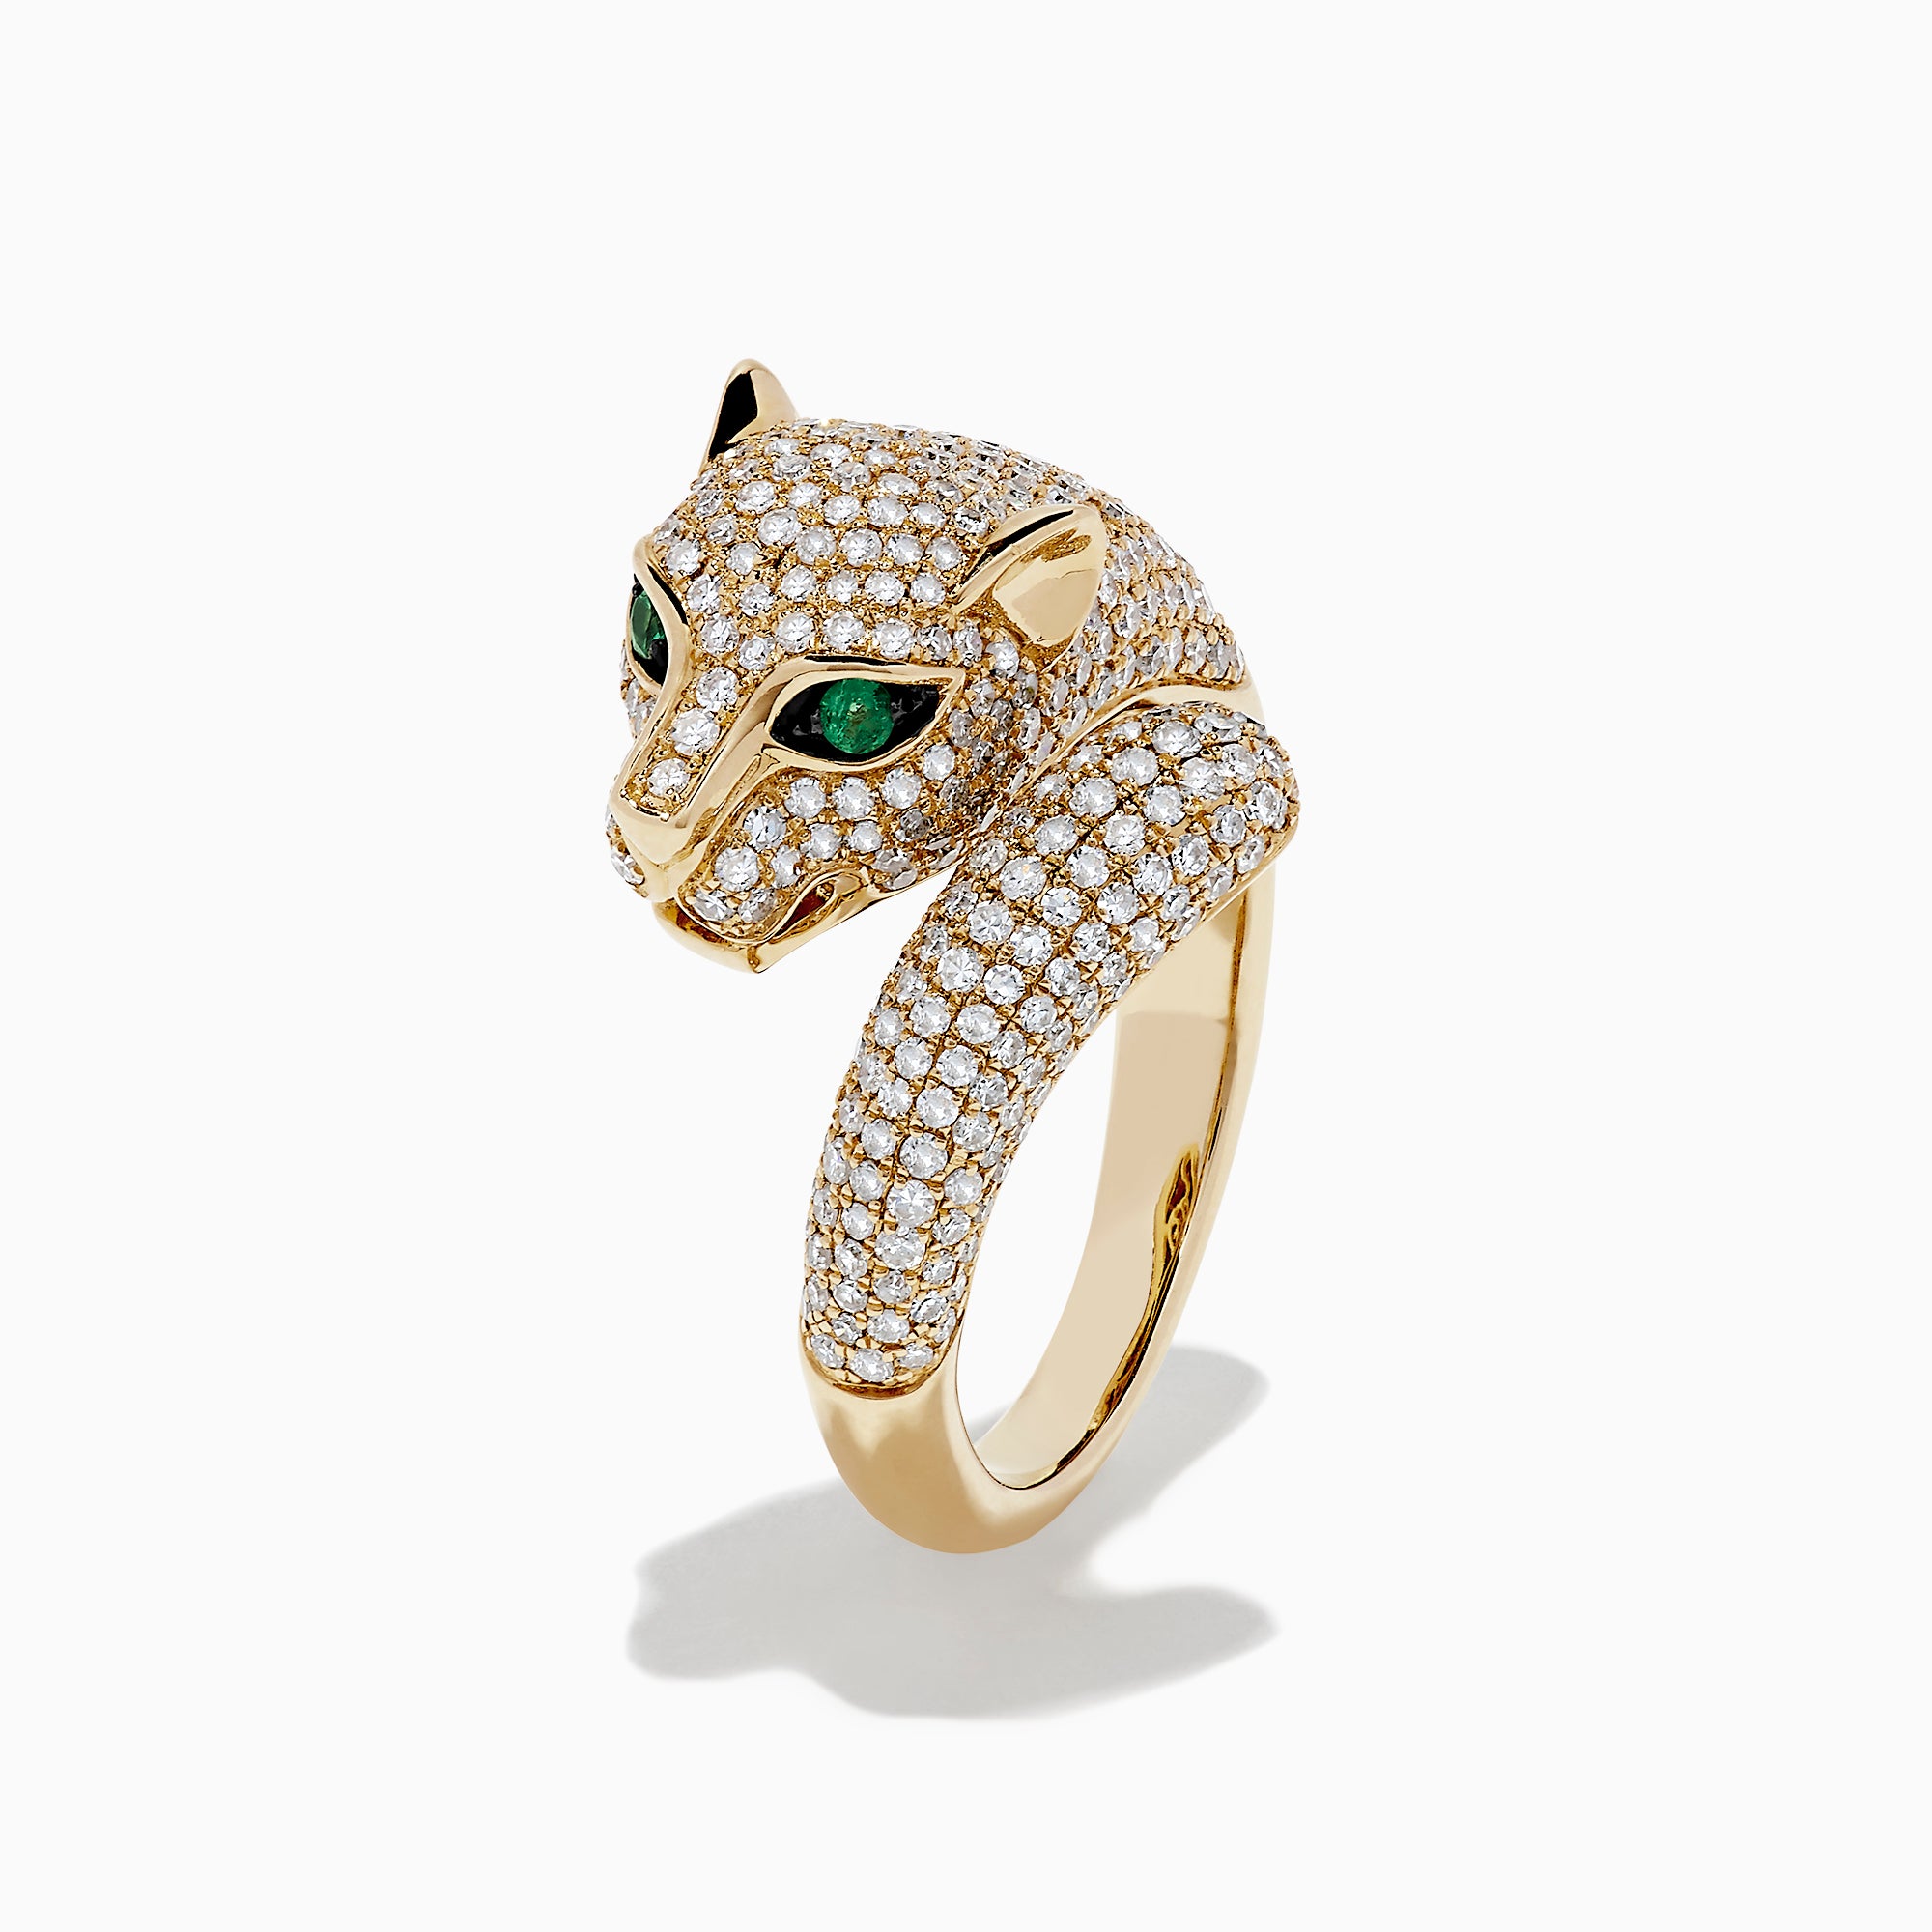 Effy Signature 14K Yellow Gold Diamond and Emerald Panther Ring, 1.43 TCW